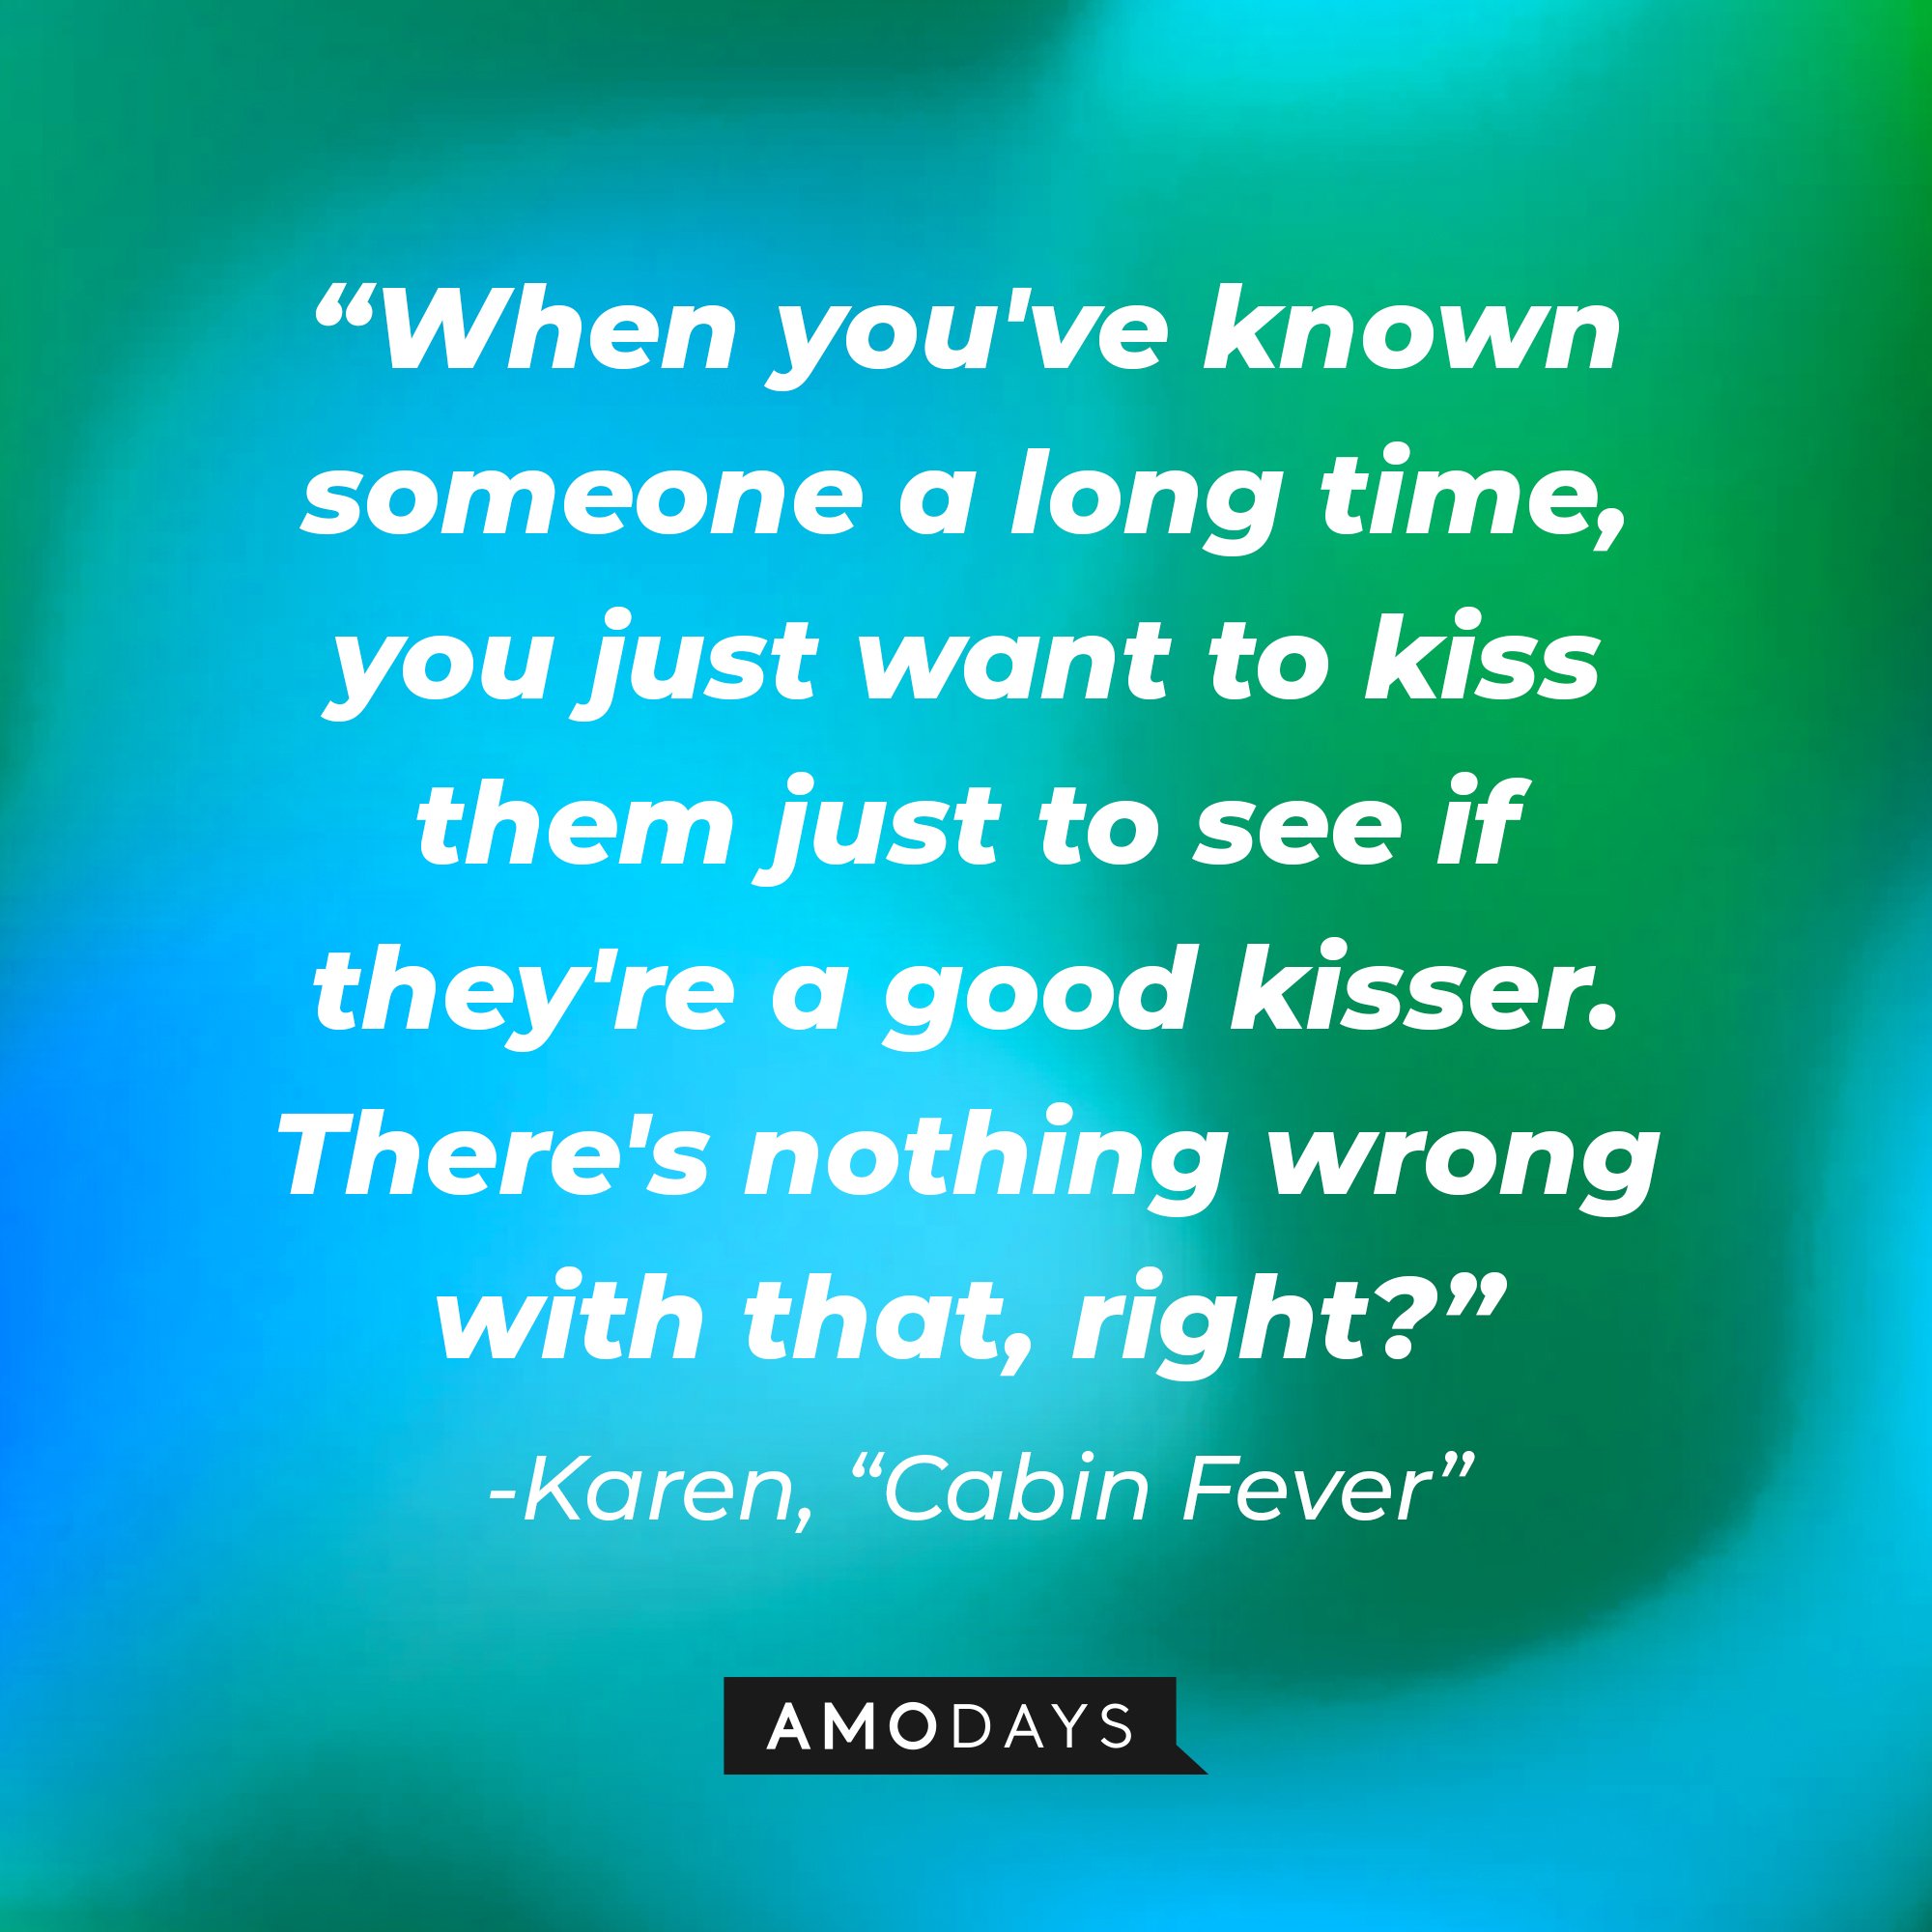 Karen's quote from "Cabin Fever:" “When you've known someone a long time, you just want to kiss them just to see if they're a good kisser. There's nothing wrong with that, right?” | Source: AmoDays